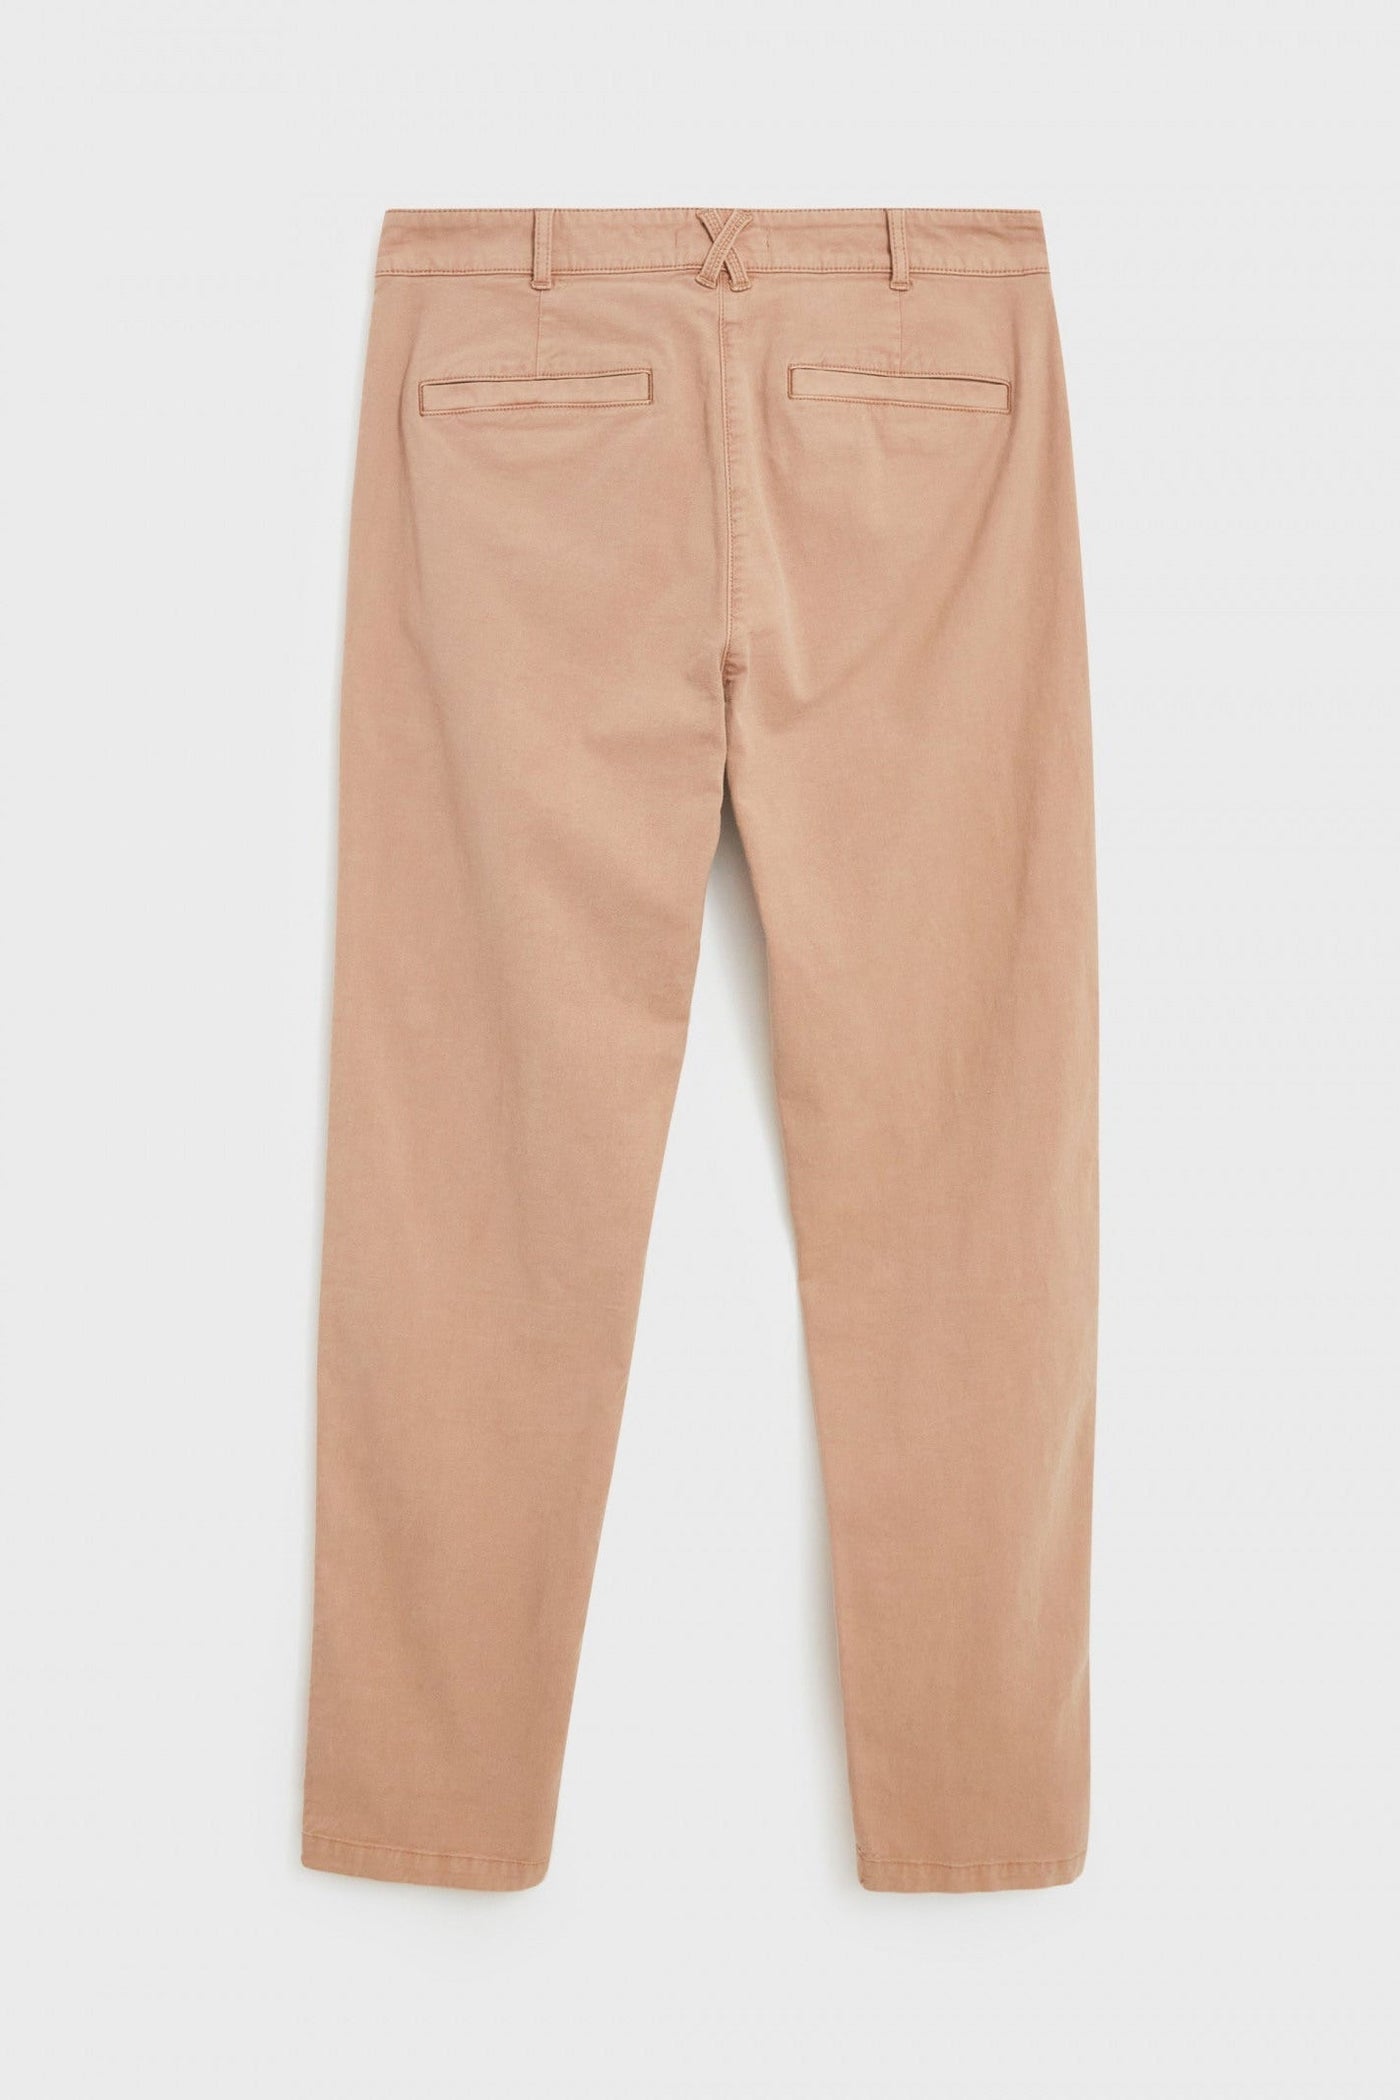 White Stuff Twister Organic Chino Trousers in Light Natural x-Womens-Ohh! By Gum - Shop Sustainable